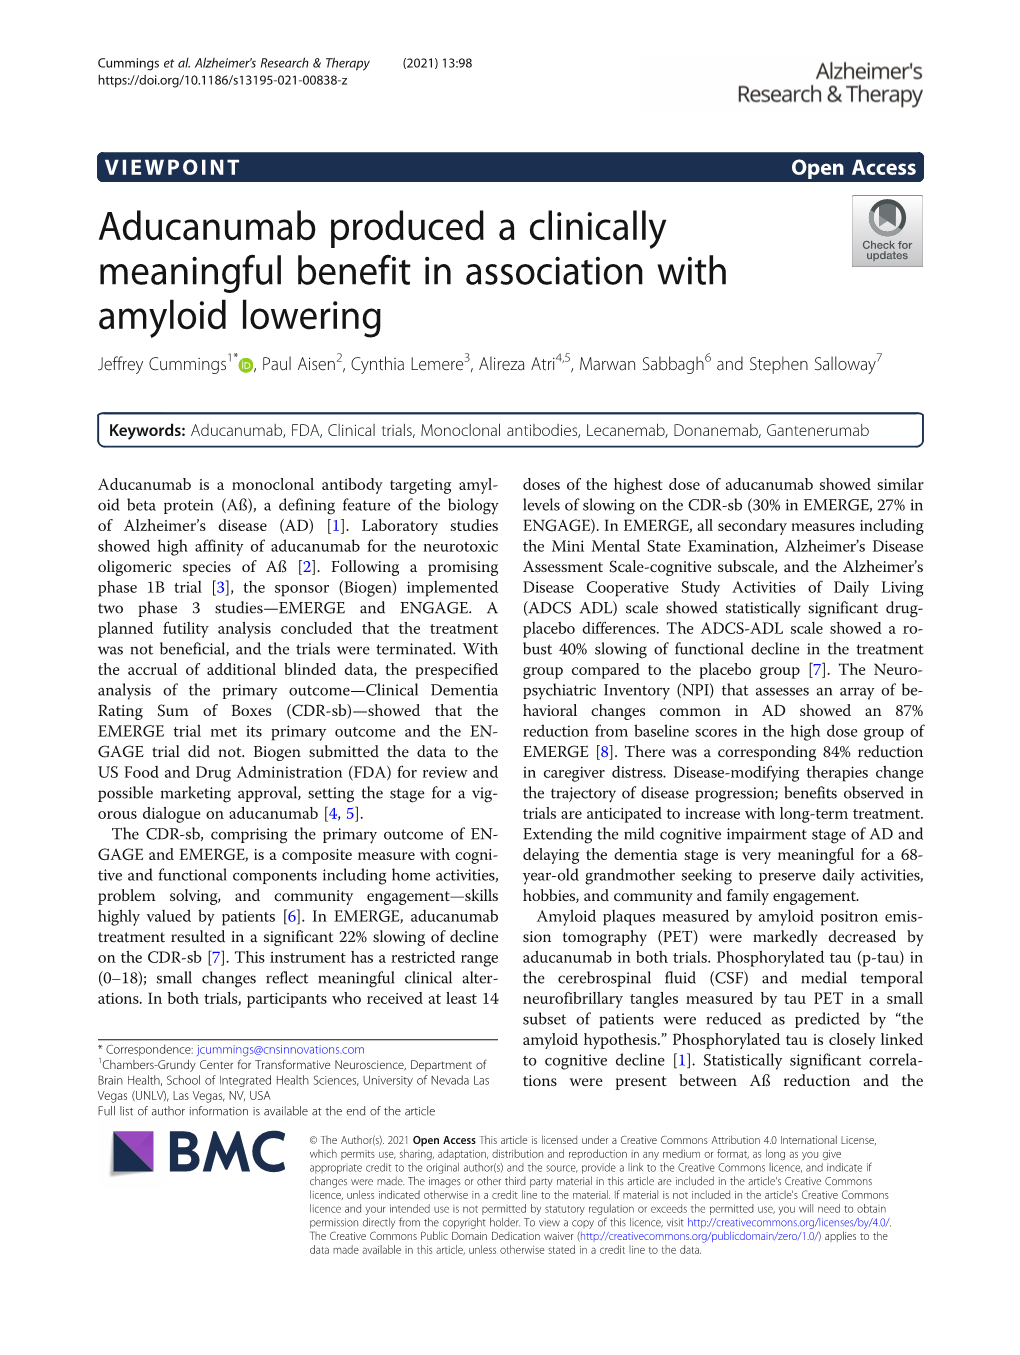 Aducanumab Produced a Clinically Meaningful Benefit in Association